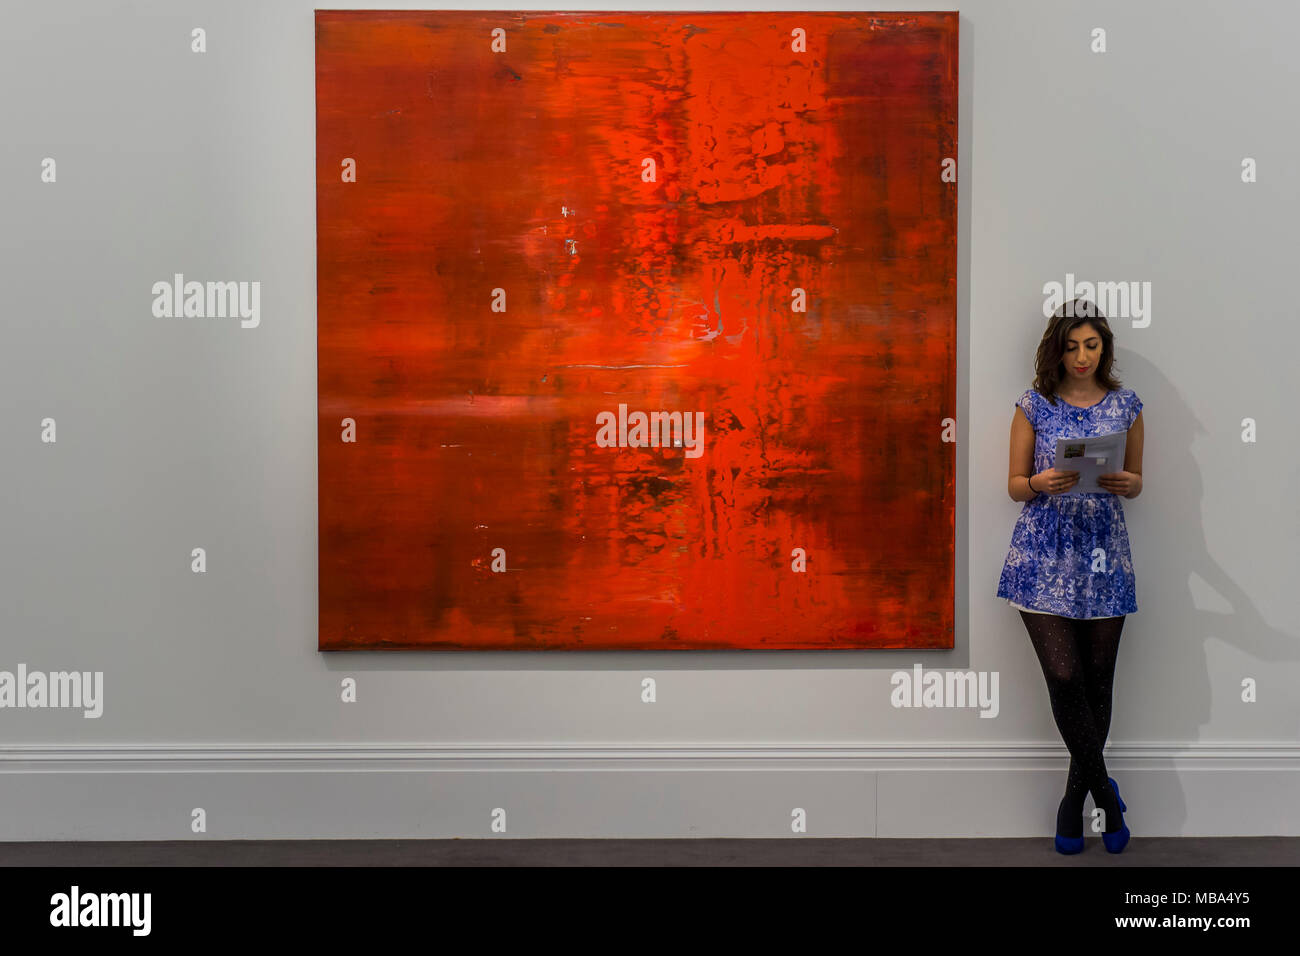 London, UK. 9th April, 2018. Abstraktes Bild, 1991, by Gerhard Richter - Highlights of Sotheby's Contemporary, Impressionist & Modern Art on dispaly at New Bond Street, London. Credit: Guy Bell/Alamy Live News Stock Photo